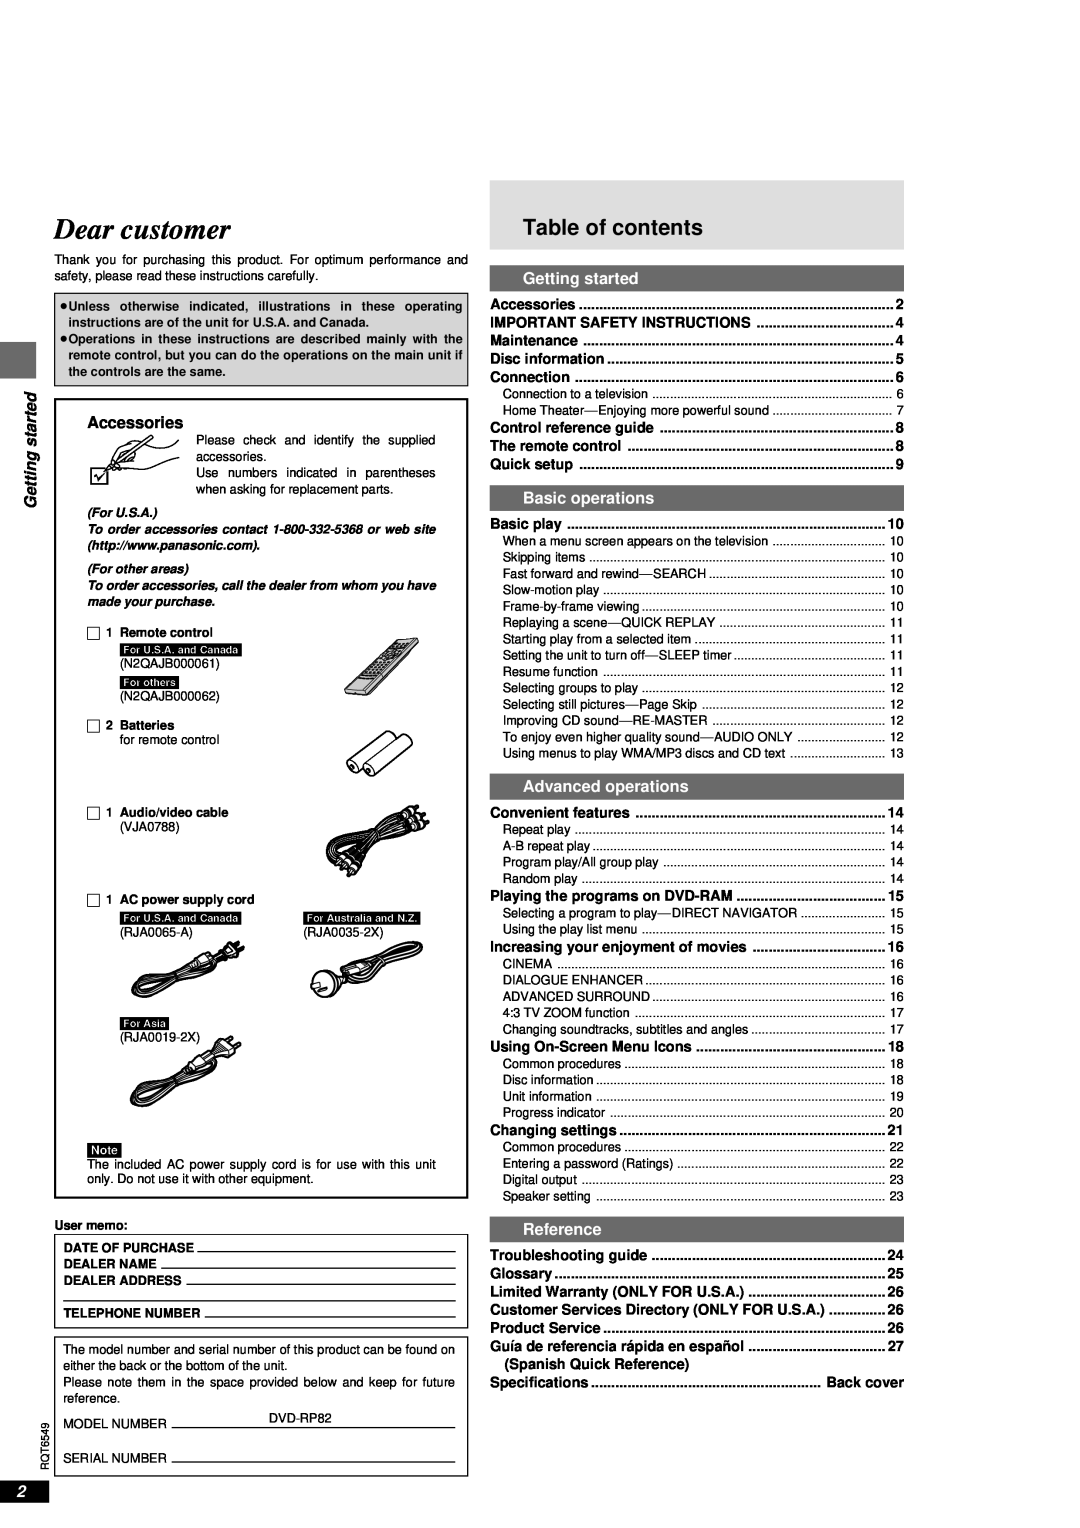 Panasonic DVD-RP82 Table of contents, Dear customer, Accessories, Getting started, Basic operations, Advanced operations 